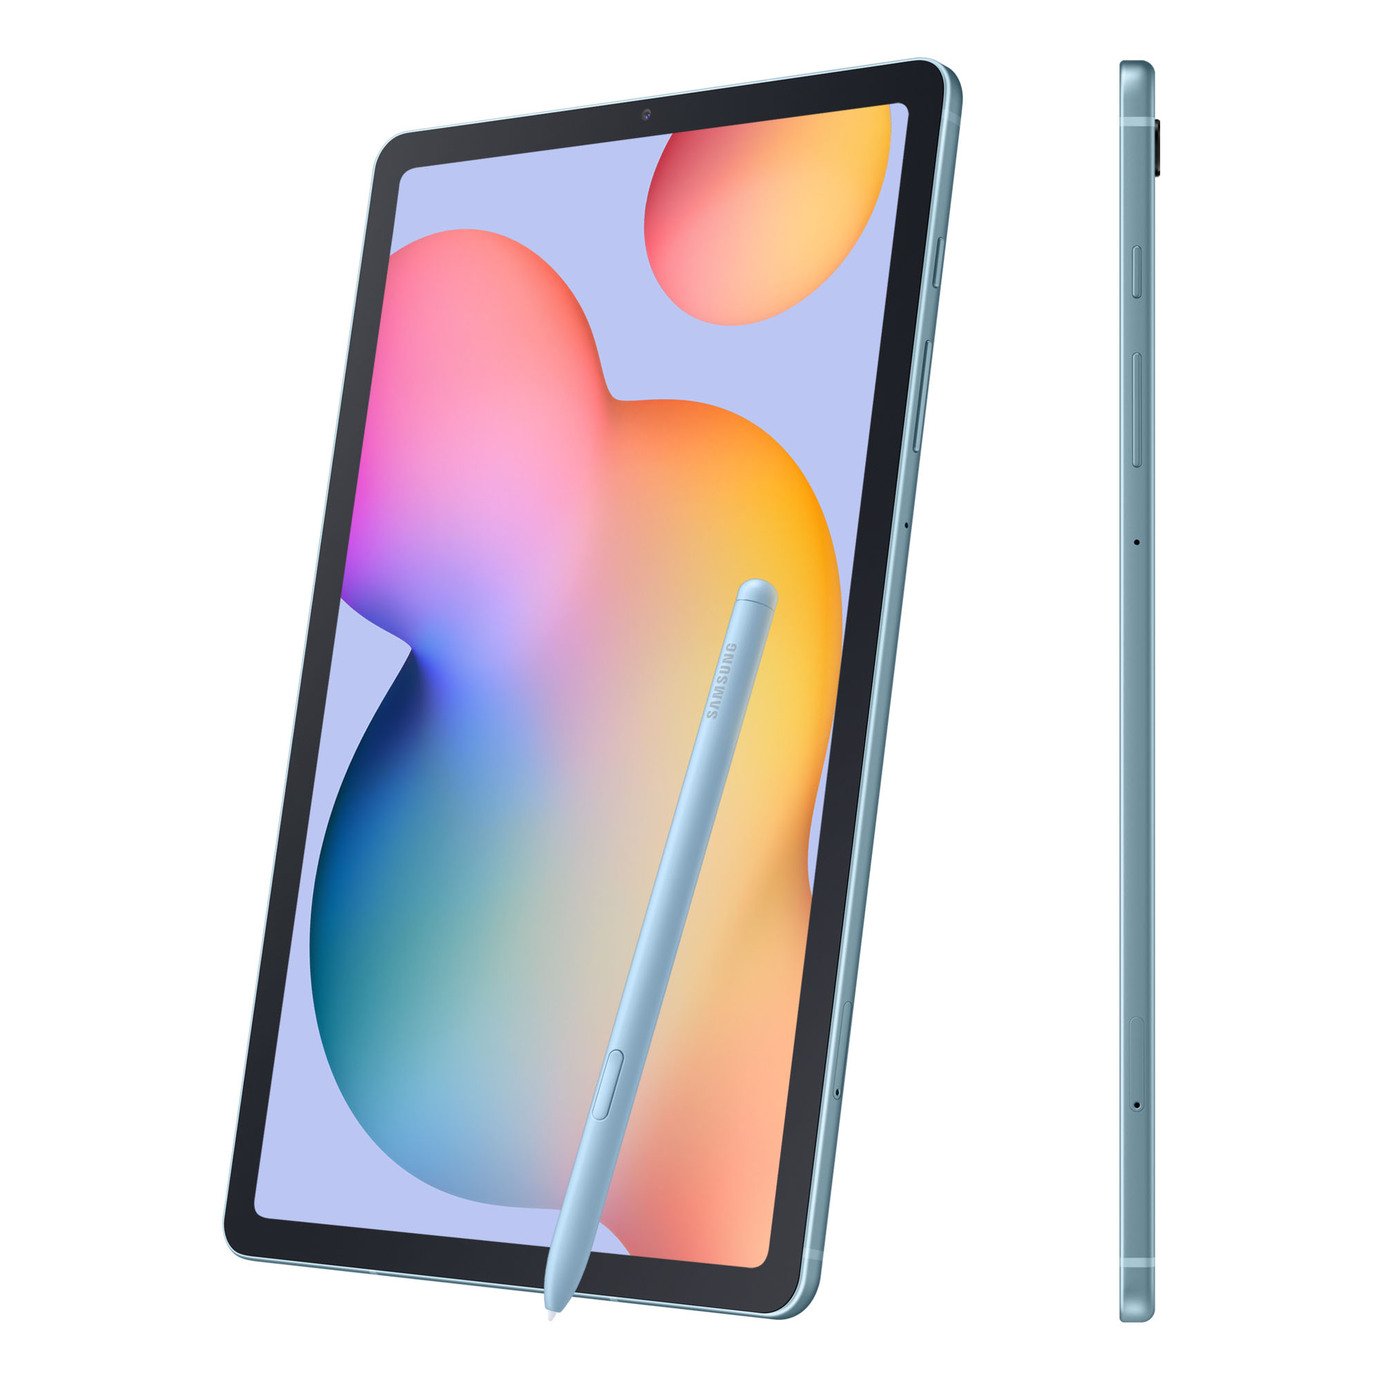 Samsung Galaxy Tab S6 Lite again listed online with price and specs in